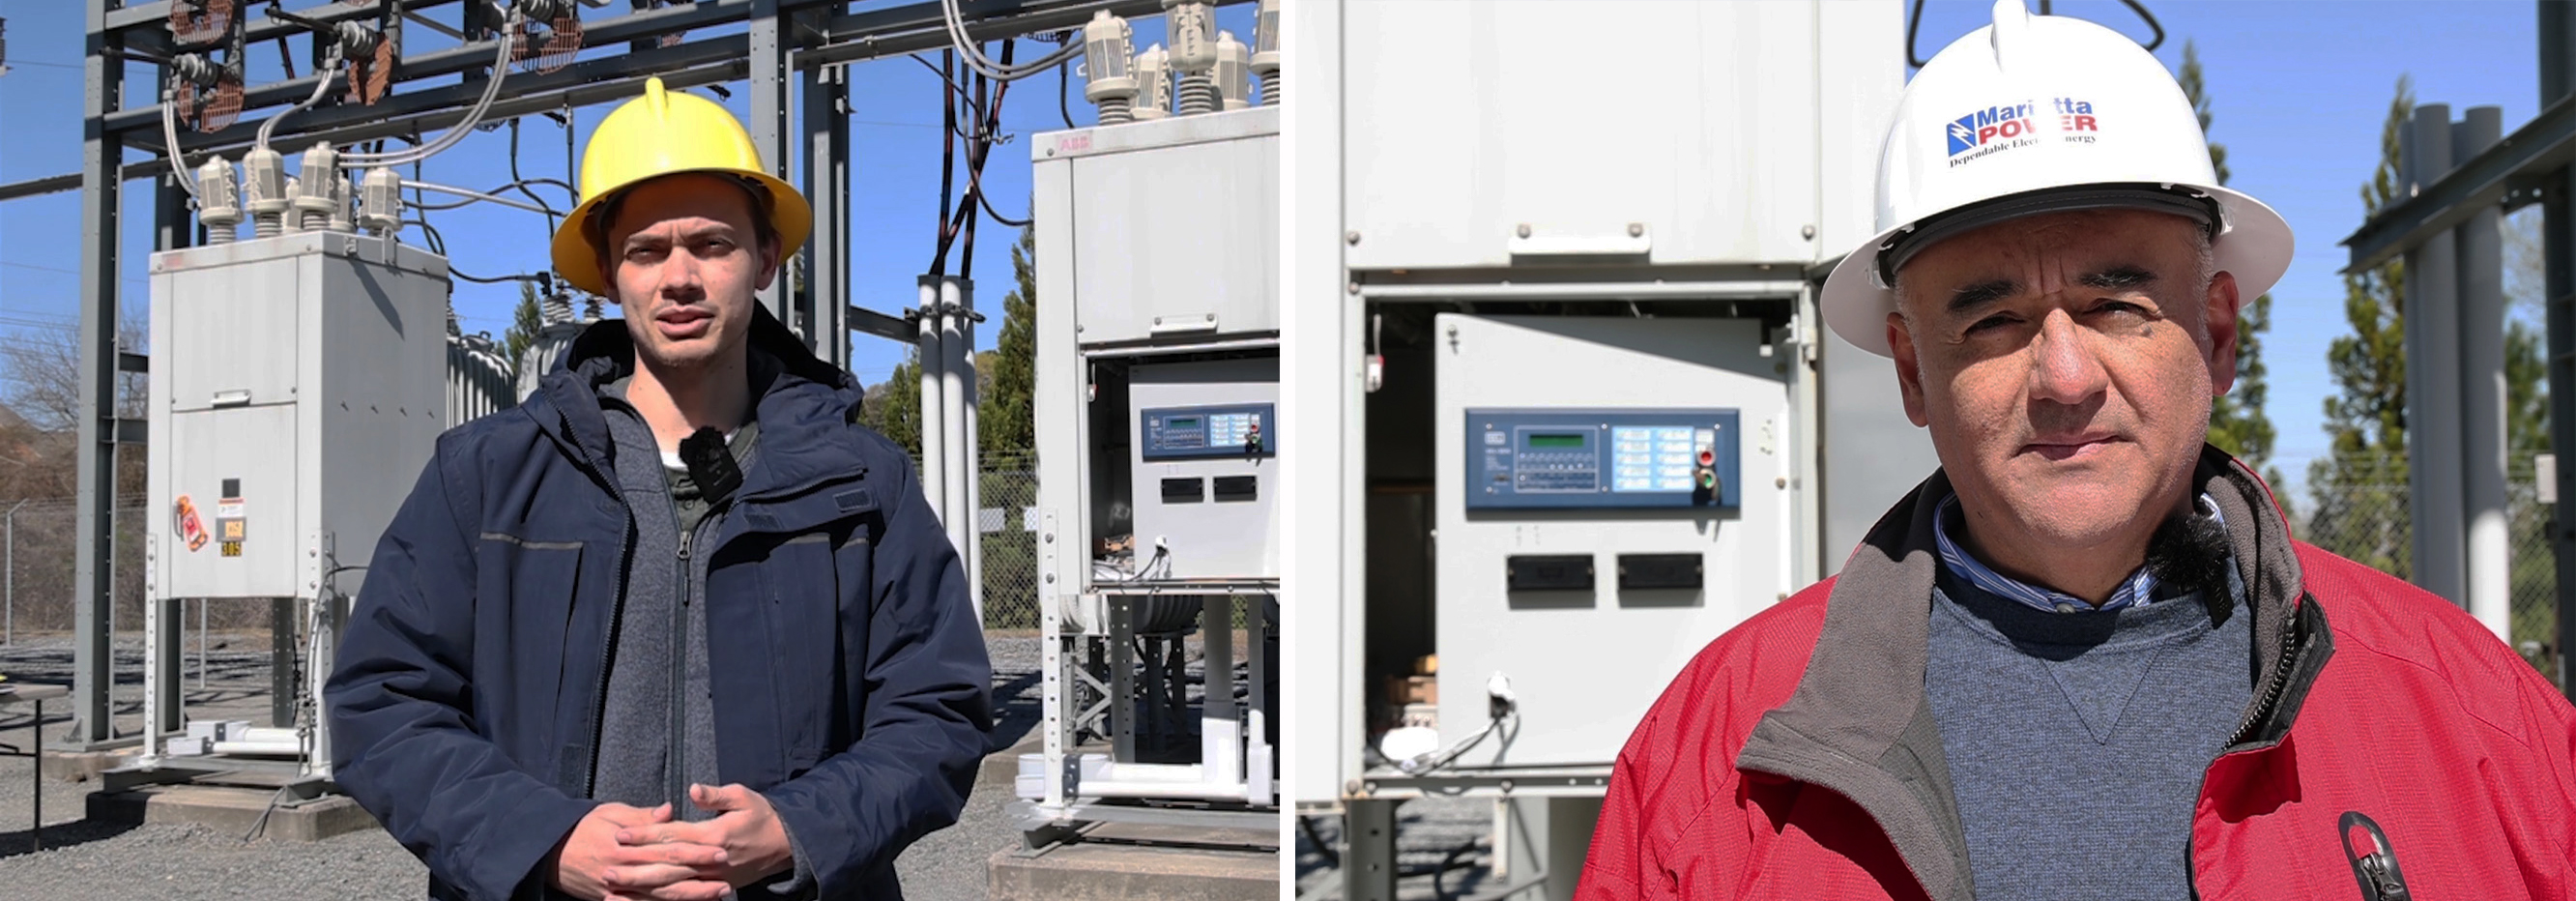 Two side by side photos of men in hard hats in front of electrical equipment.